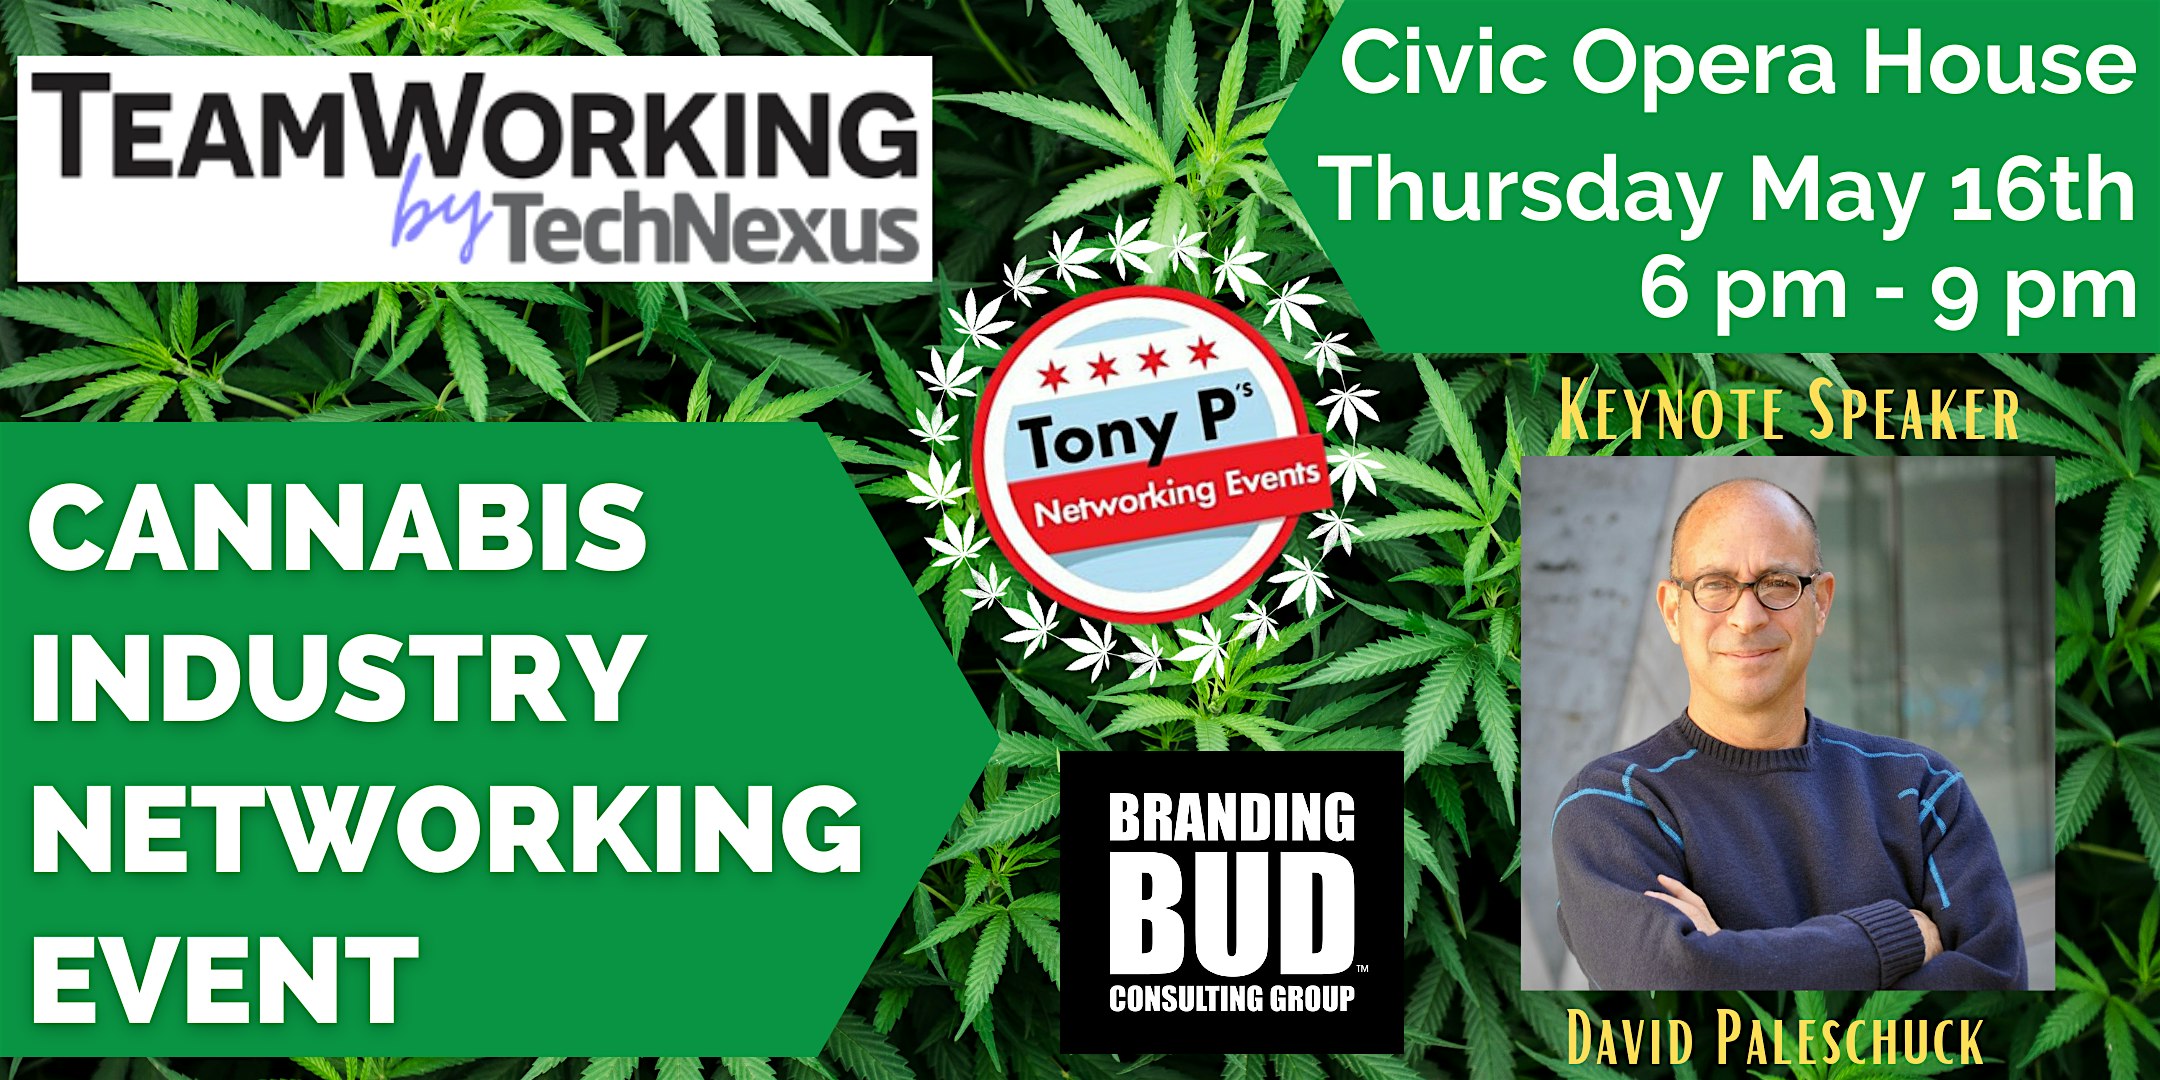 Tony P’s Cannabis Industry Networking Event: Thursday May 16th